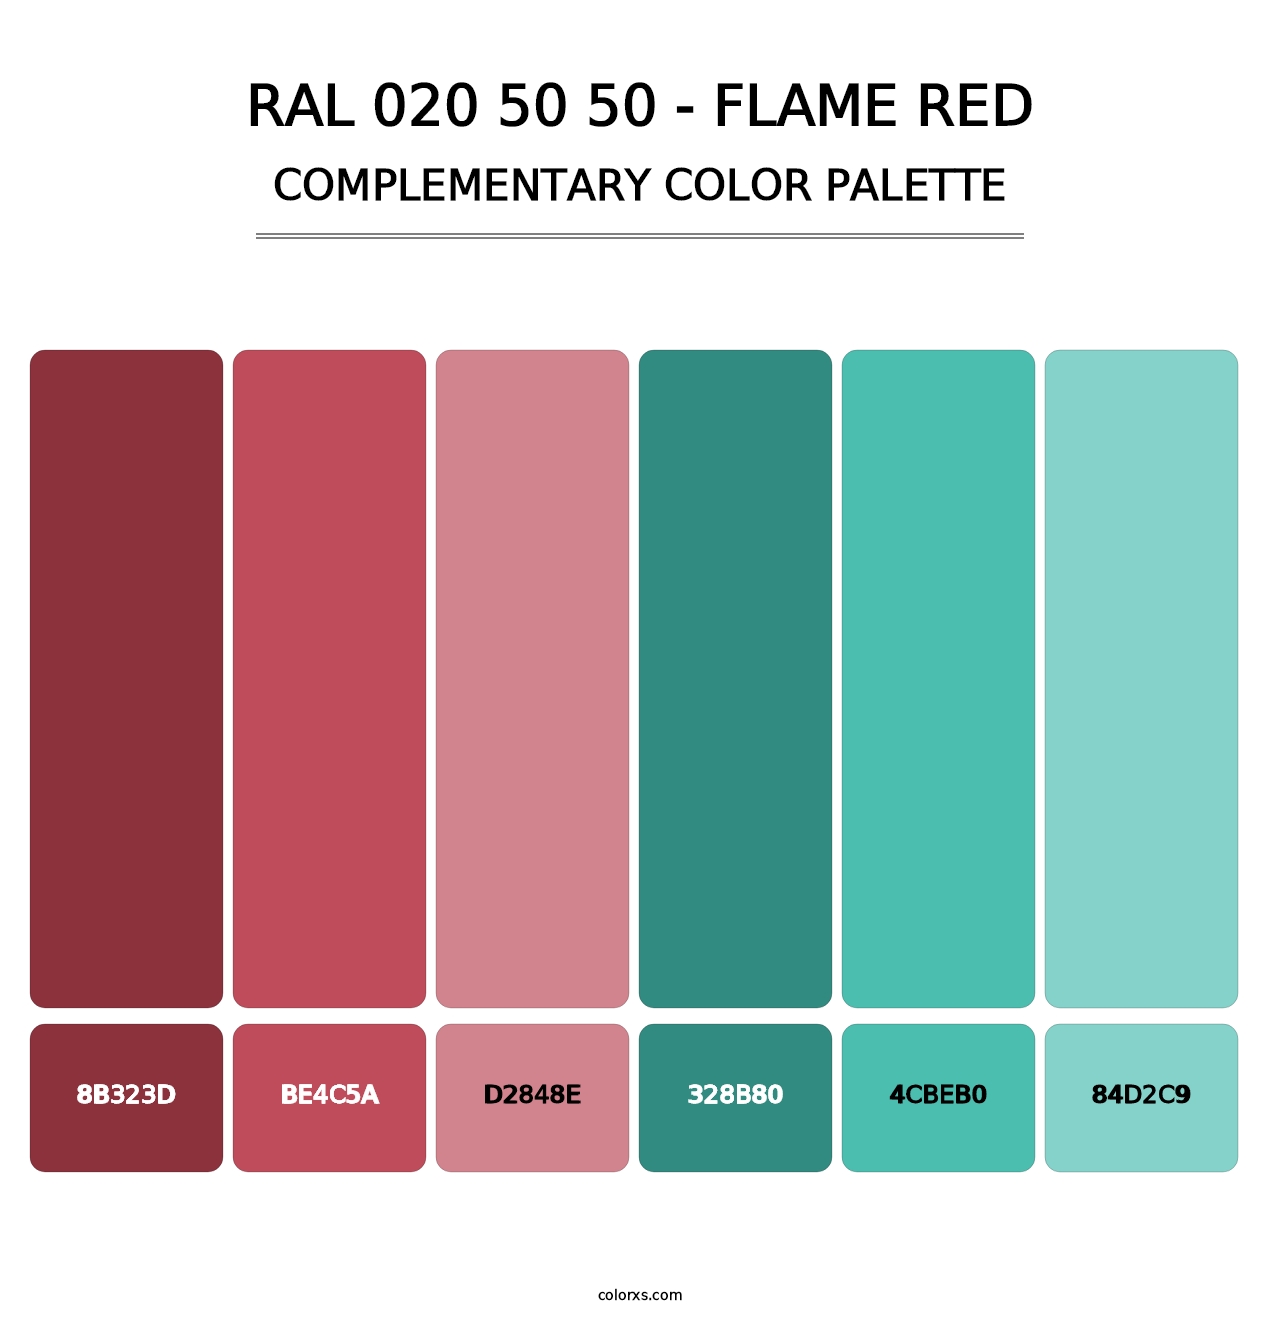 RAL 020 50 50 - Flame Red - Complementary Color Palette